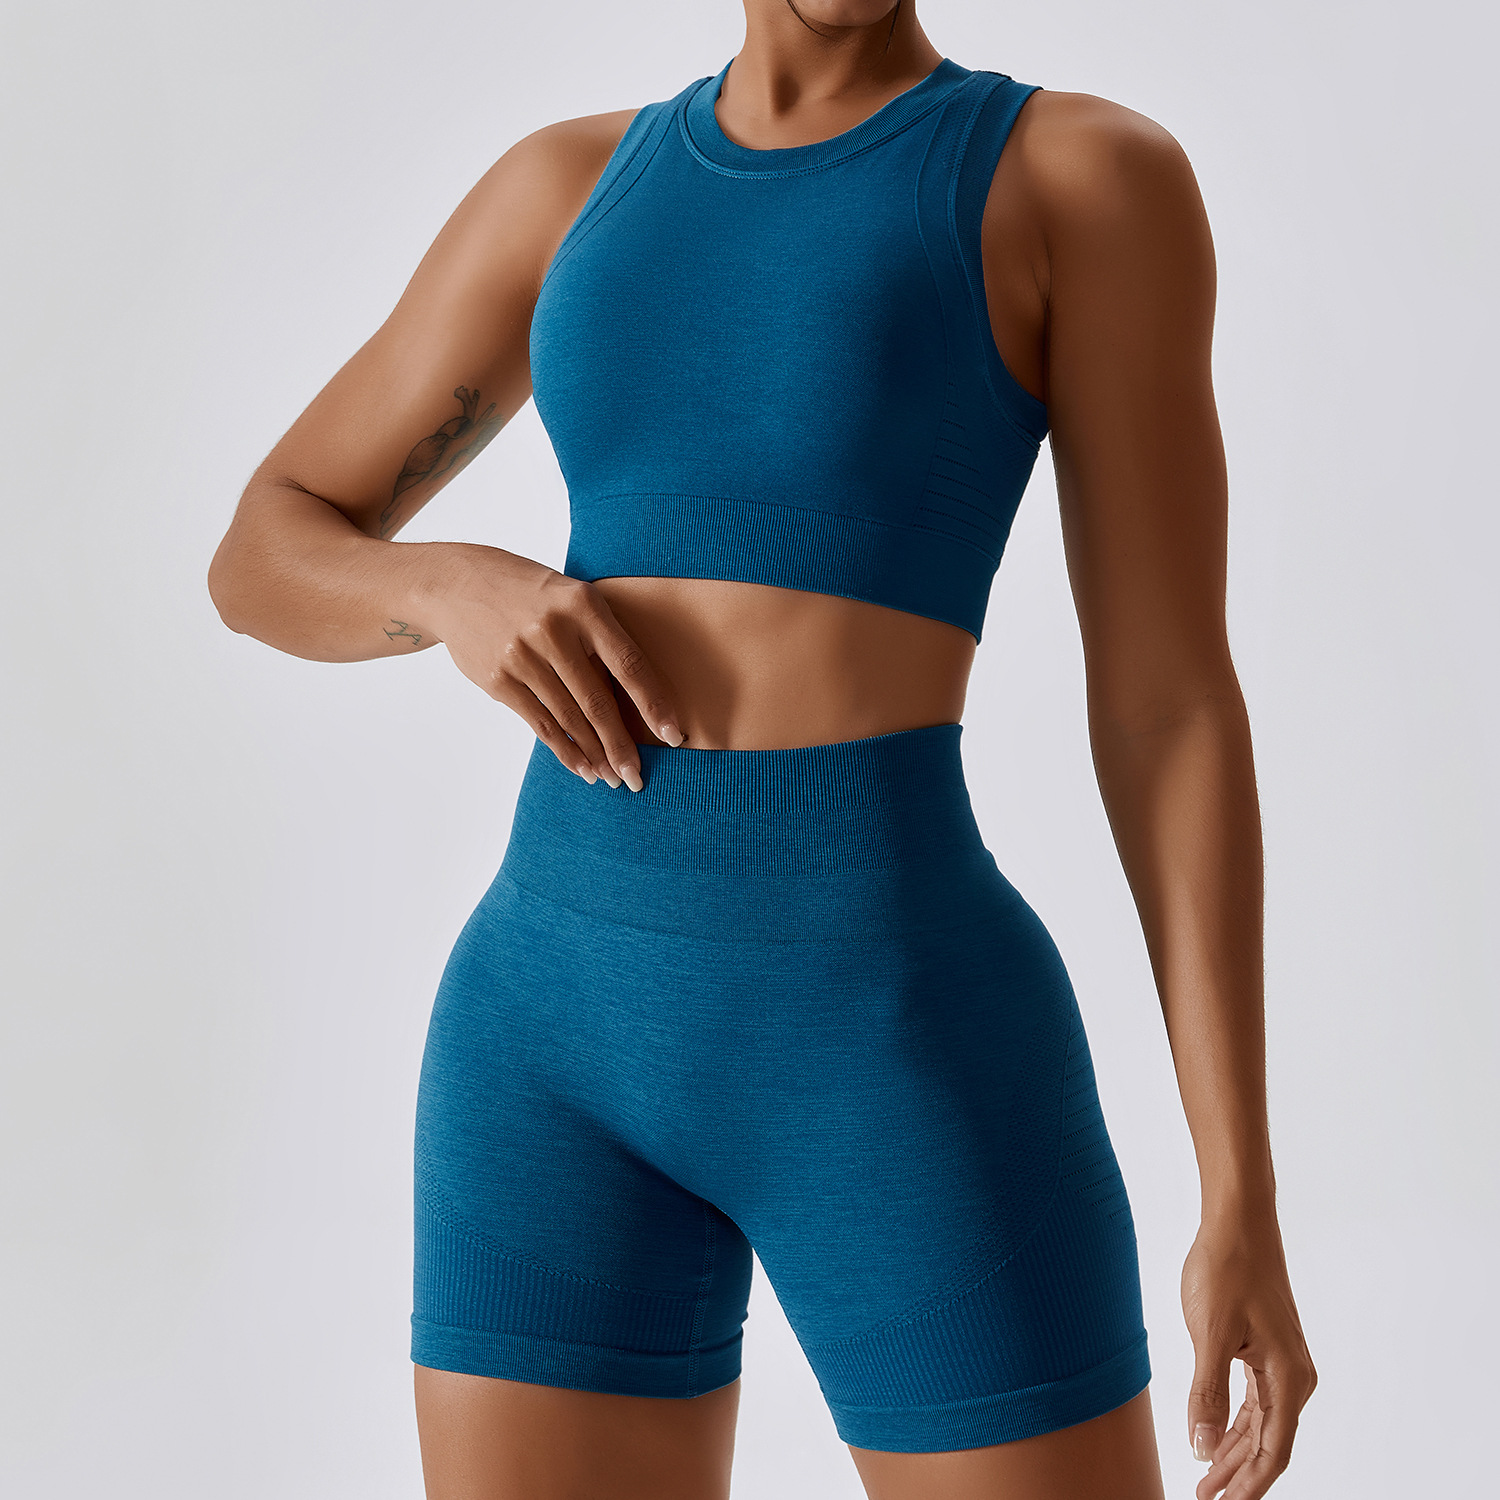 private label fitness apparel manufacturers